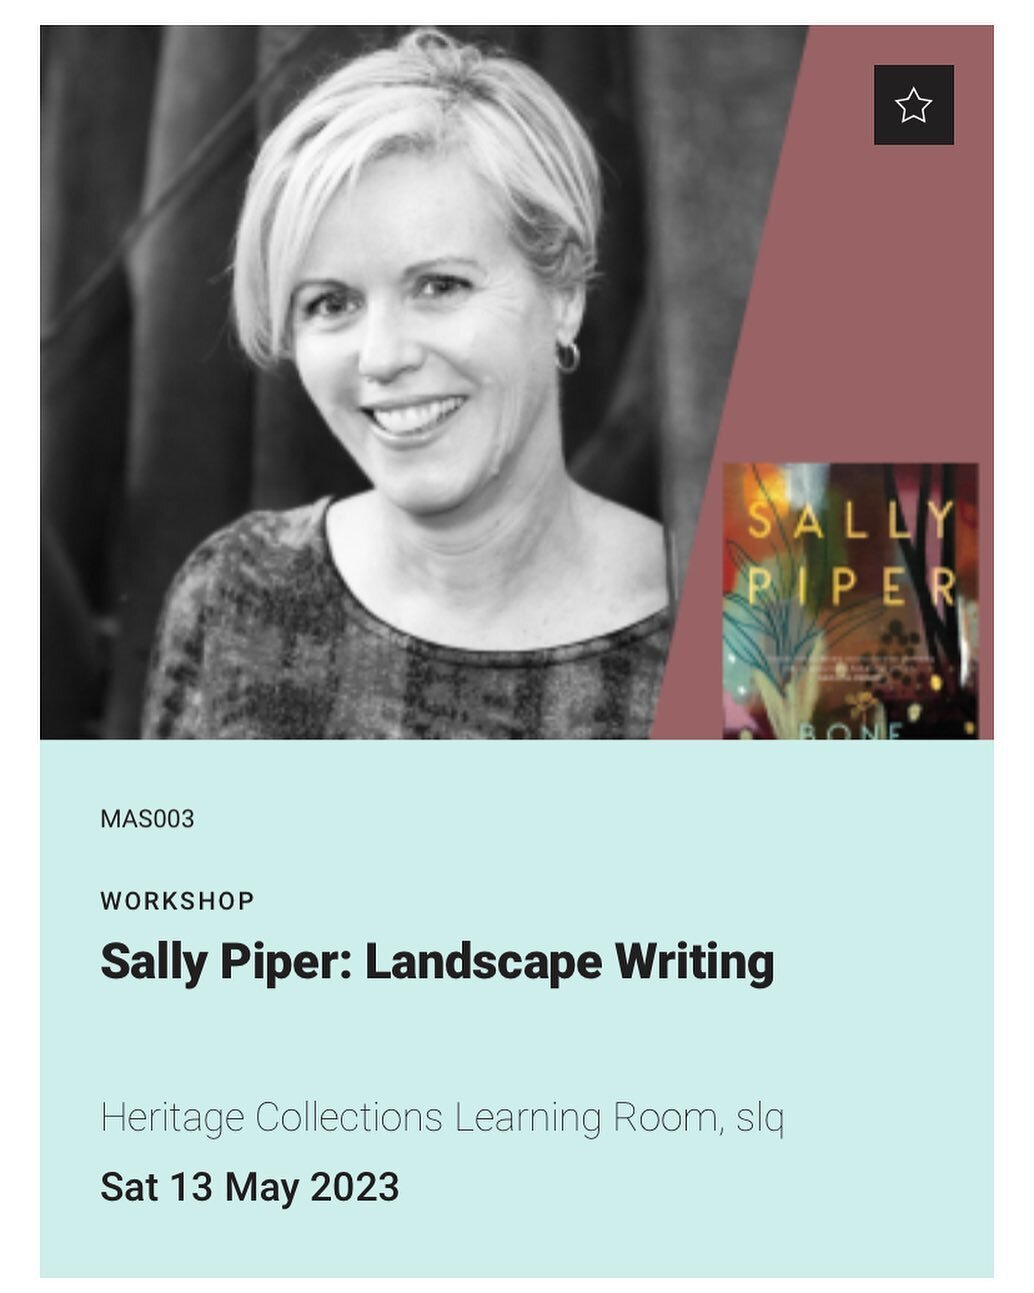 I&rsquo;m very excited to be presenting this 3-hour workshop for the Brisbane Writers Festival on Saturday 13 May from 10am - 1pm at State Library of Queensland. Then on Sunday I&rsquo;ll be speaking with Robbie Arnott (Limberlost), Inga Simpson (Wil